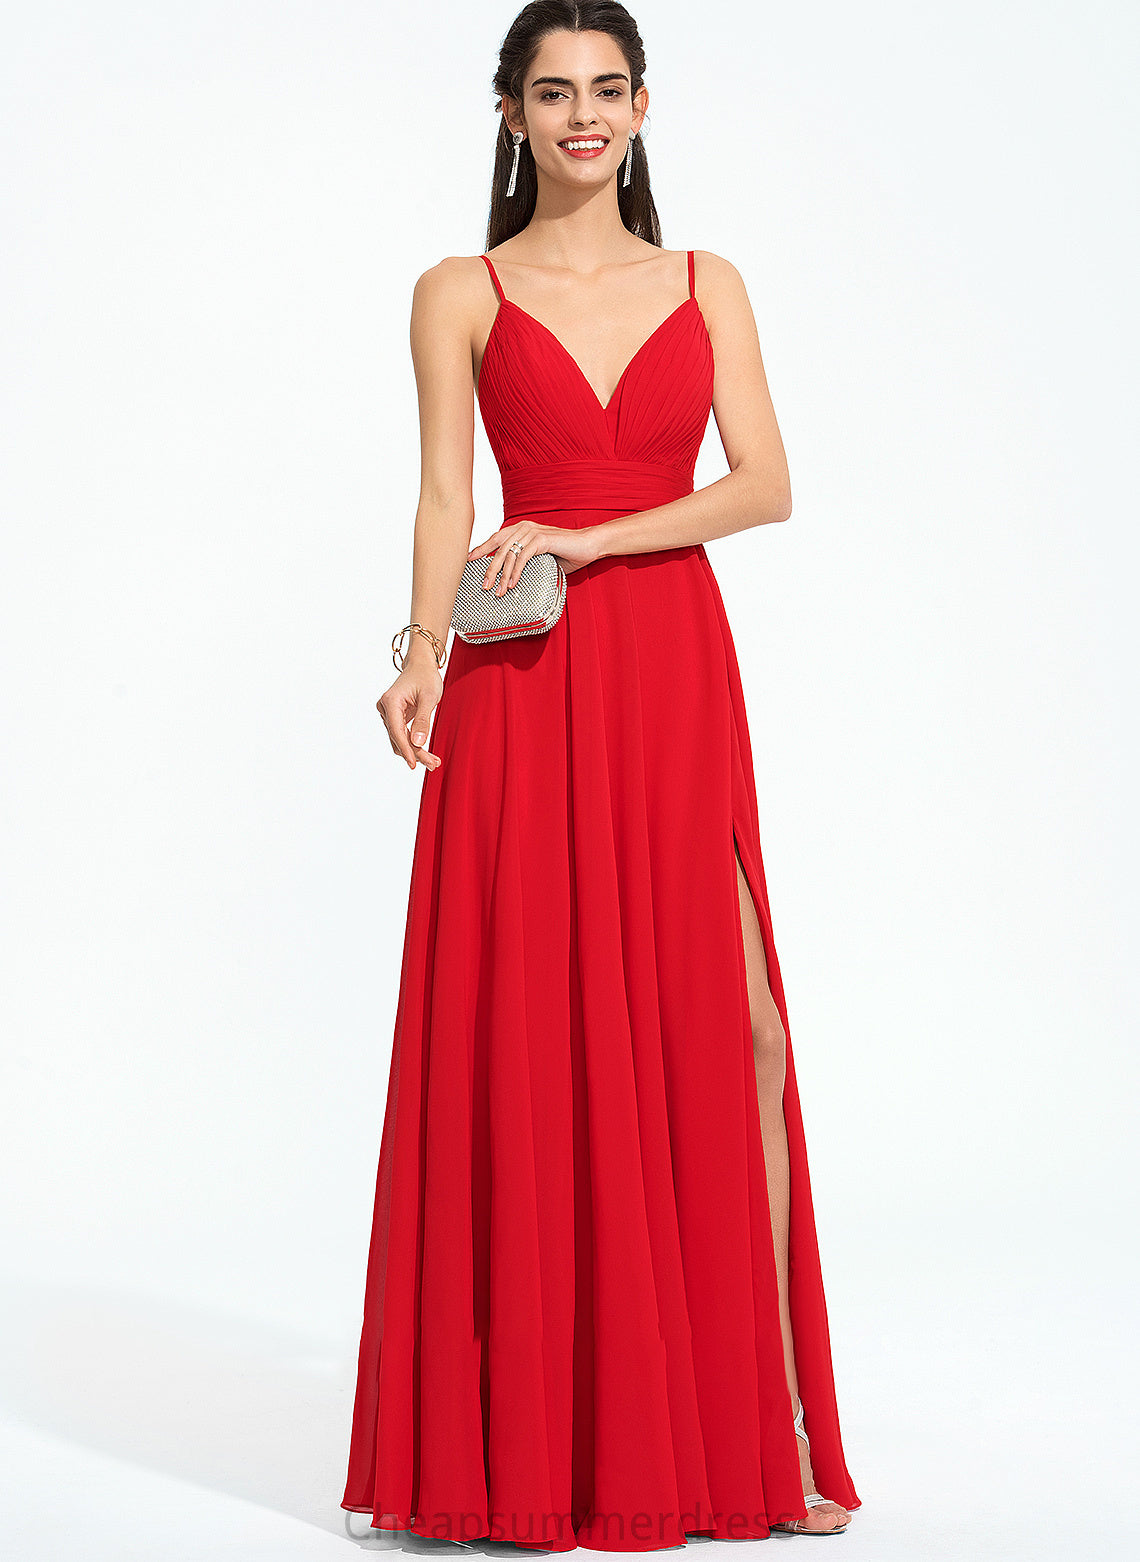 Chiffon V-neck Prom Dresses Floor-Length Front A-Line Split With Karla Ruffle